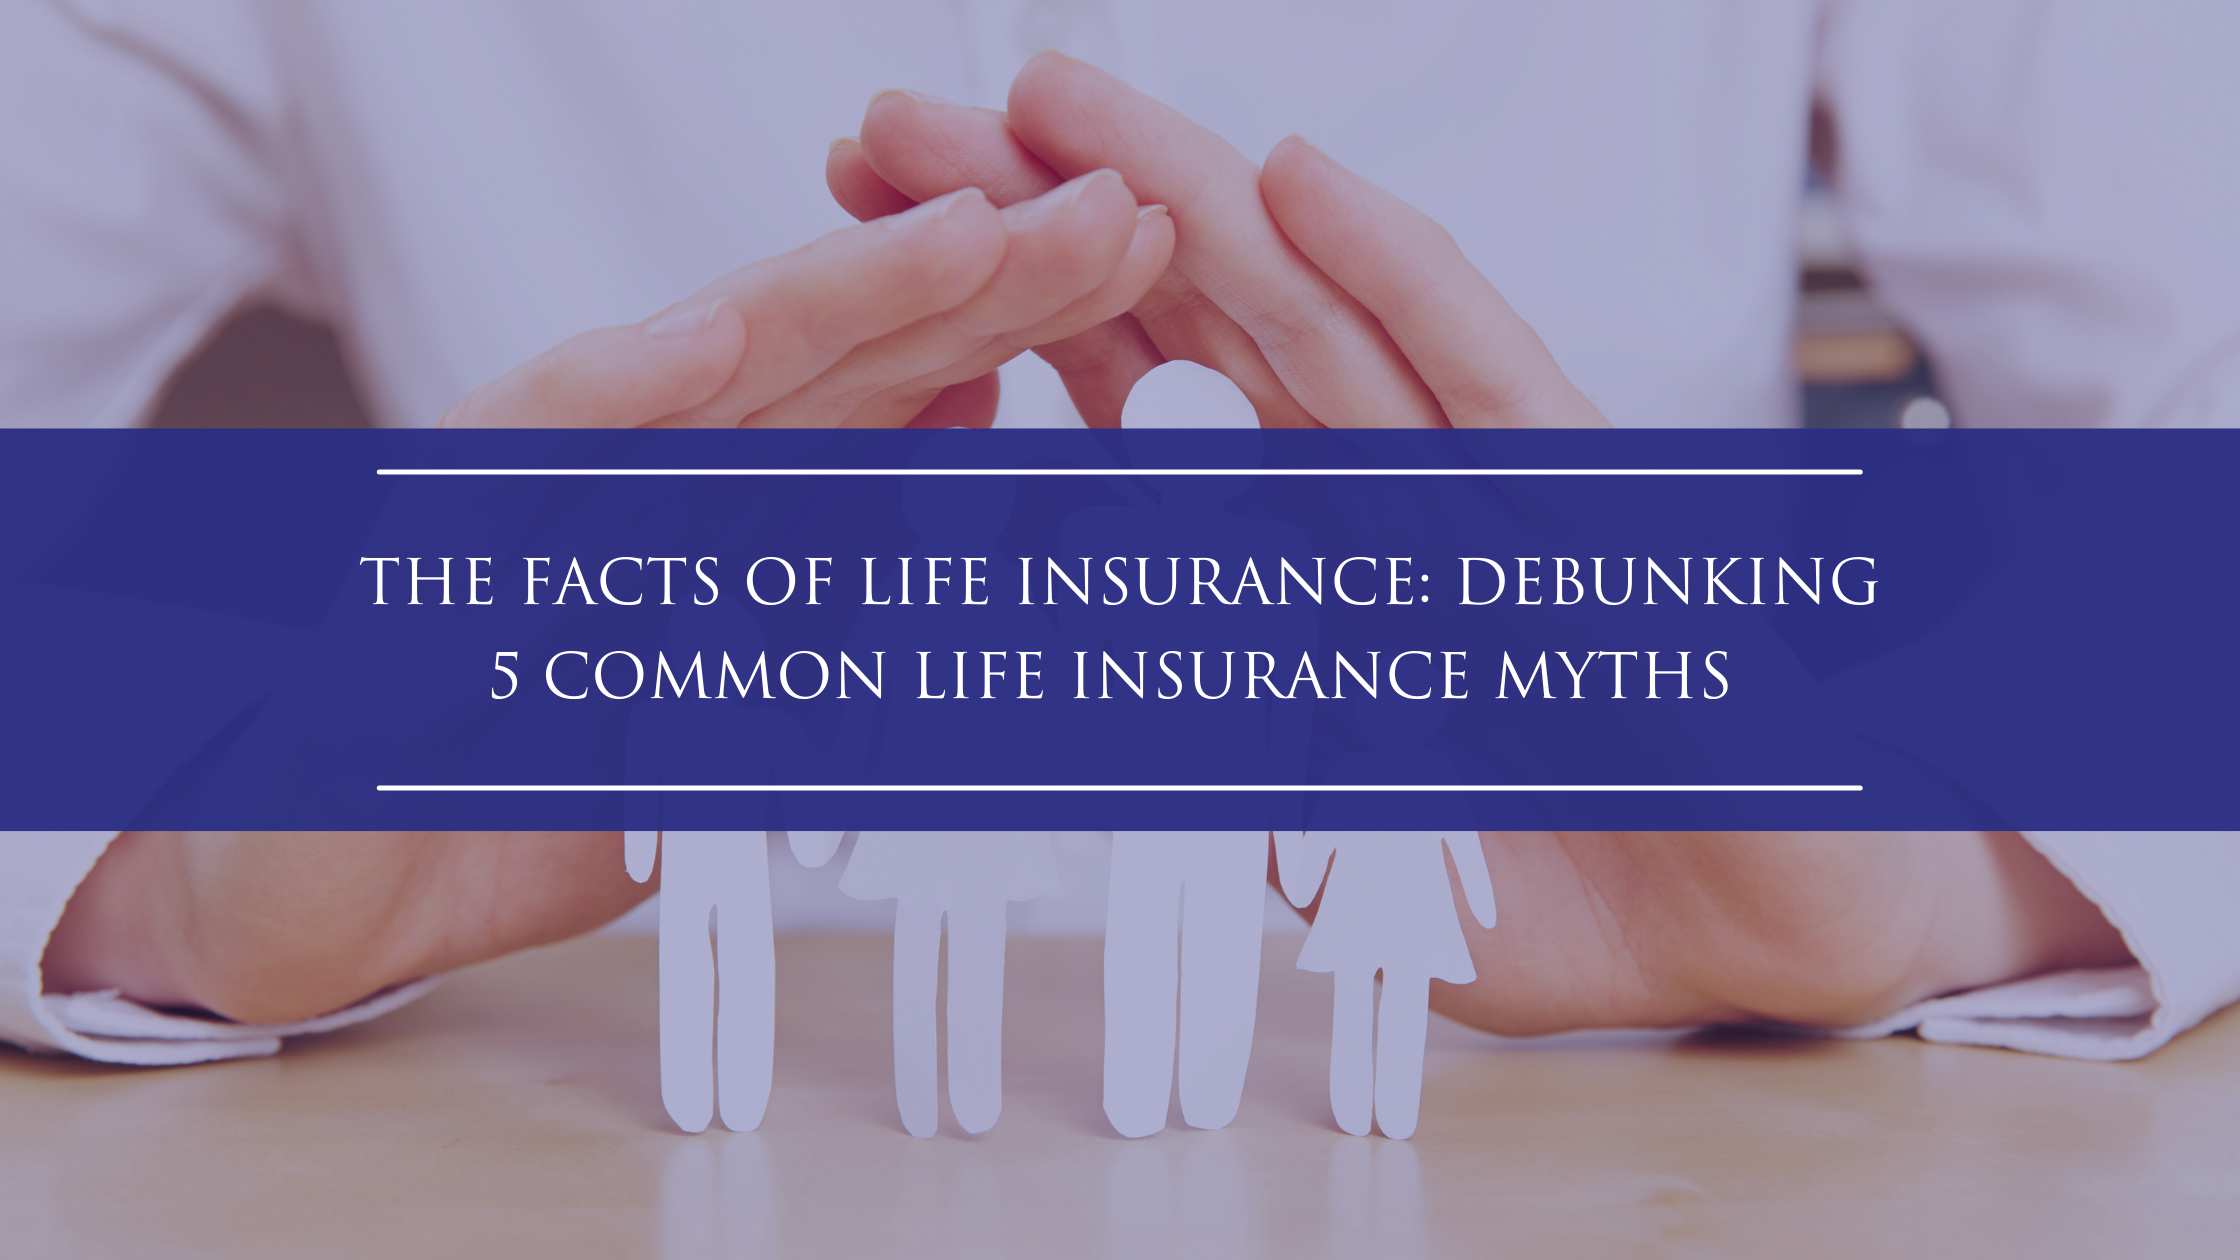 The Facts of Life Insurance: Debunking 5 Common Life Insurance Myths